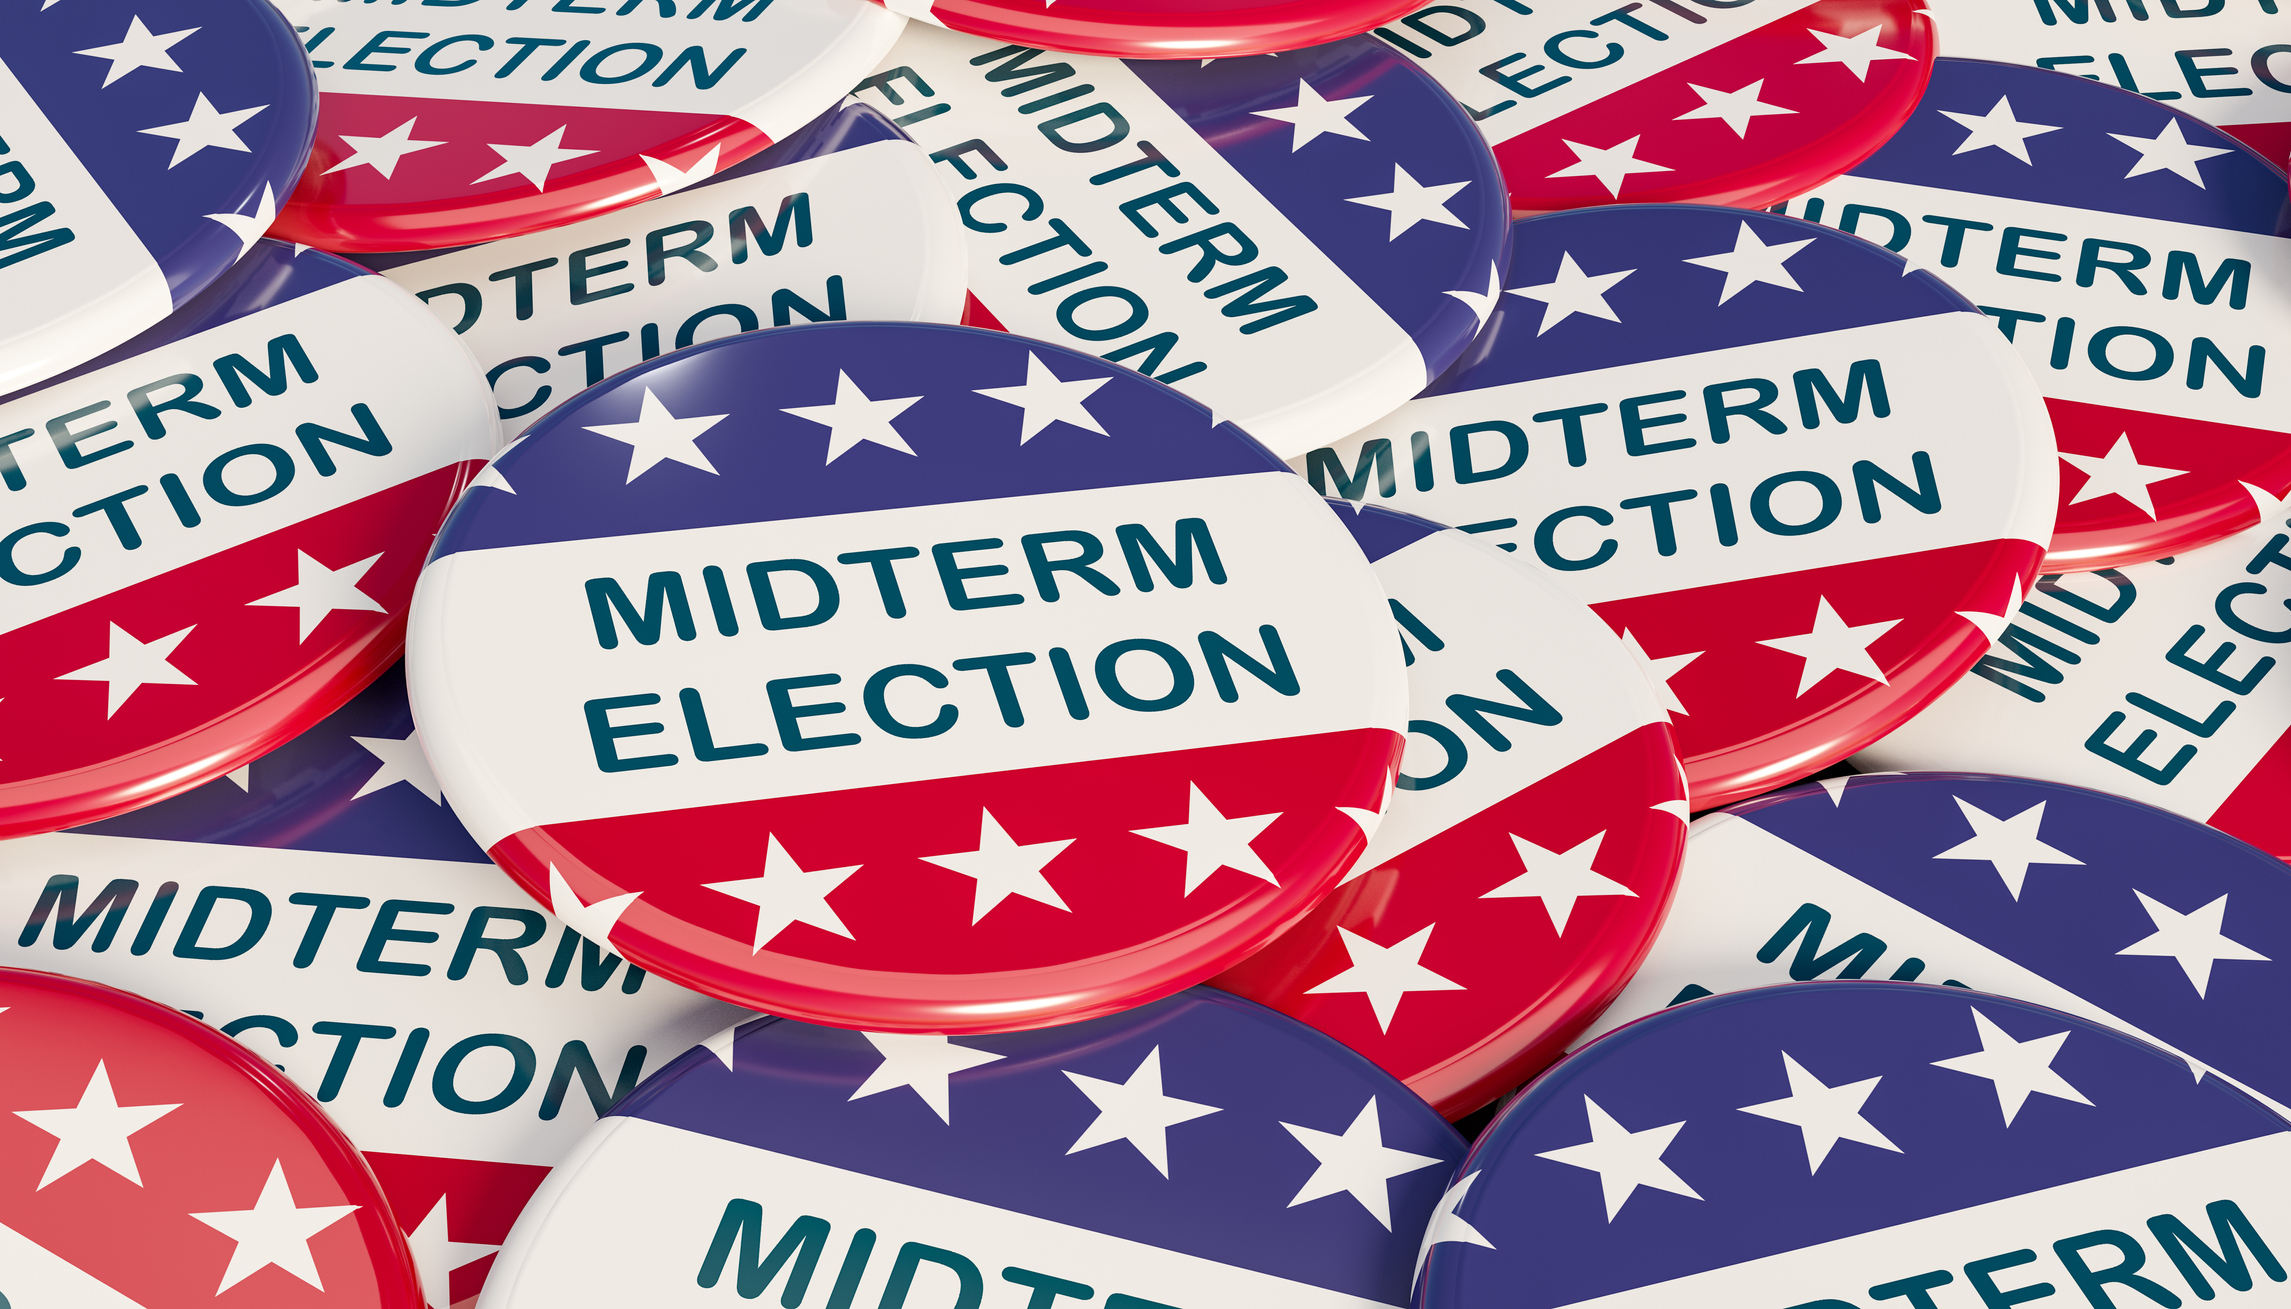 Cover image for  article: How the Midterm Elections May Impact Media Regulations